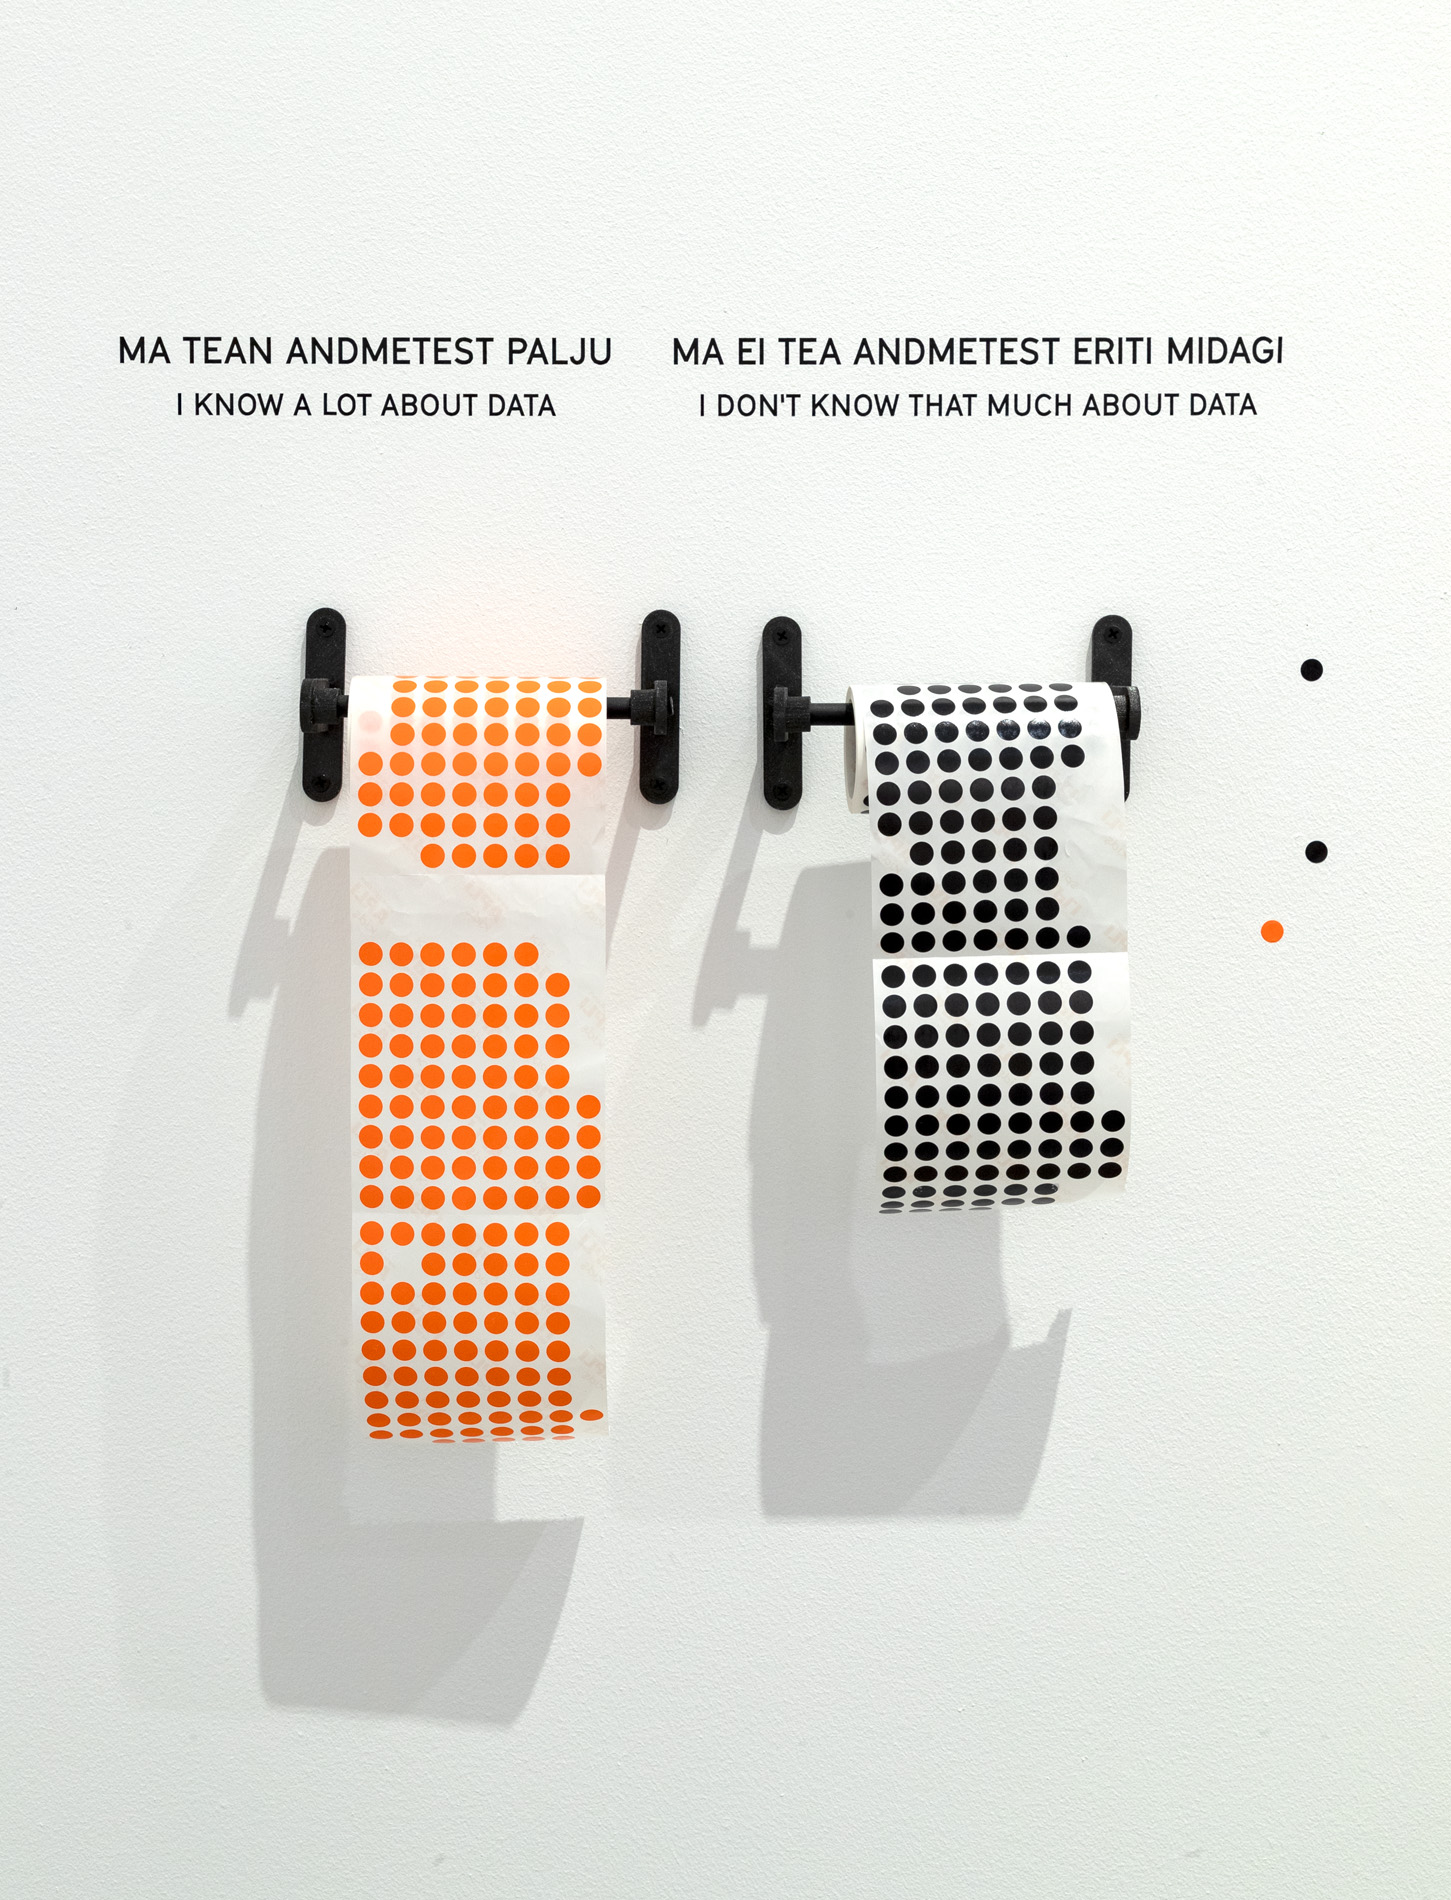 Number Fascination: the Me-Mind exhibithion at Estoninan National Museum - the promise and the challenge of big data